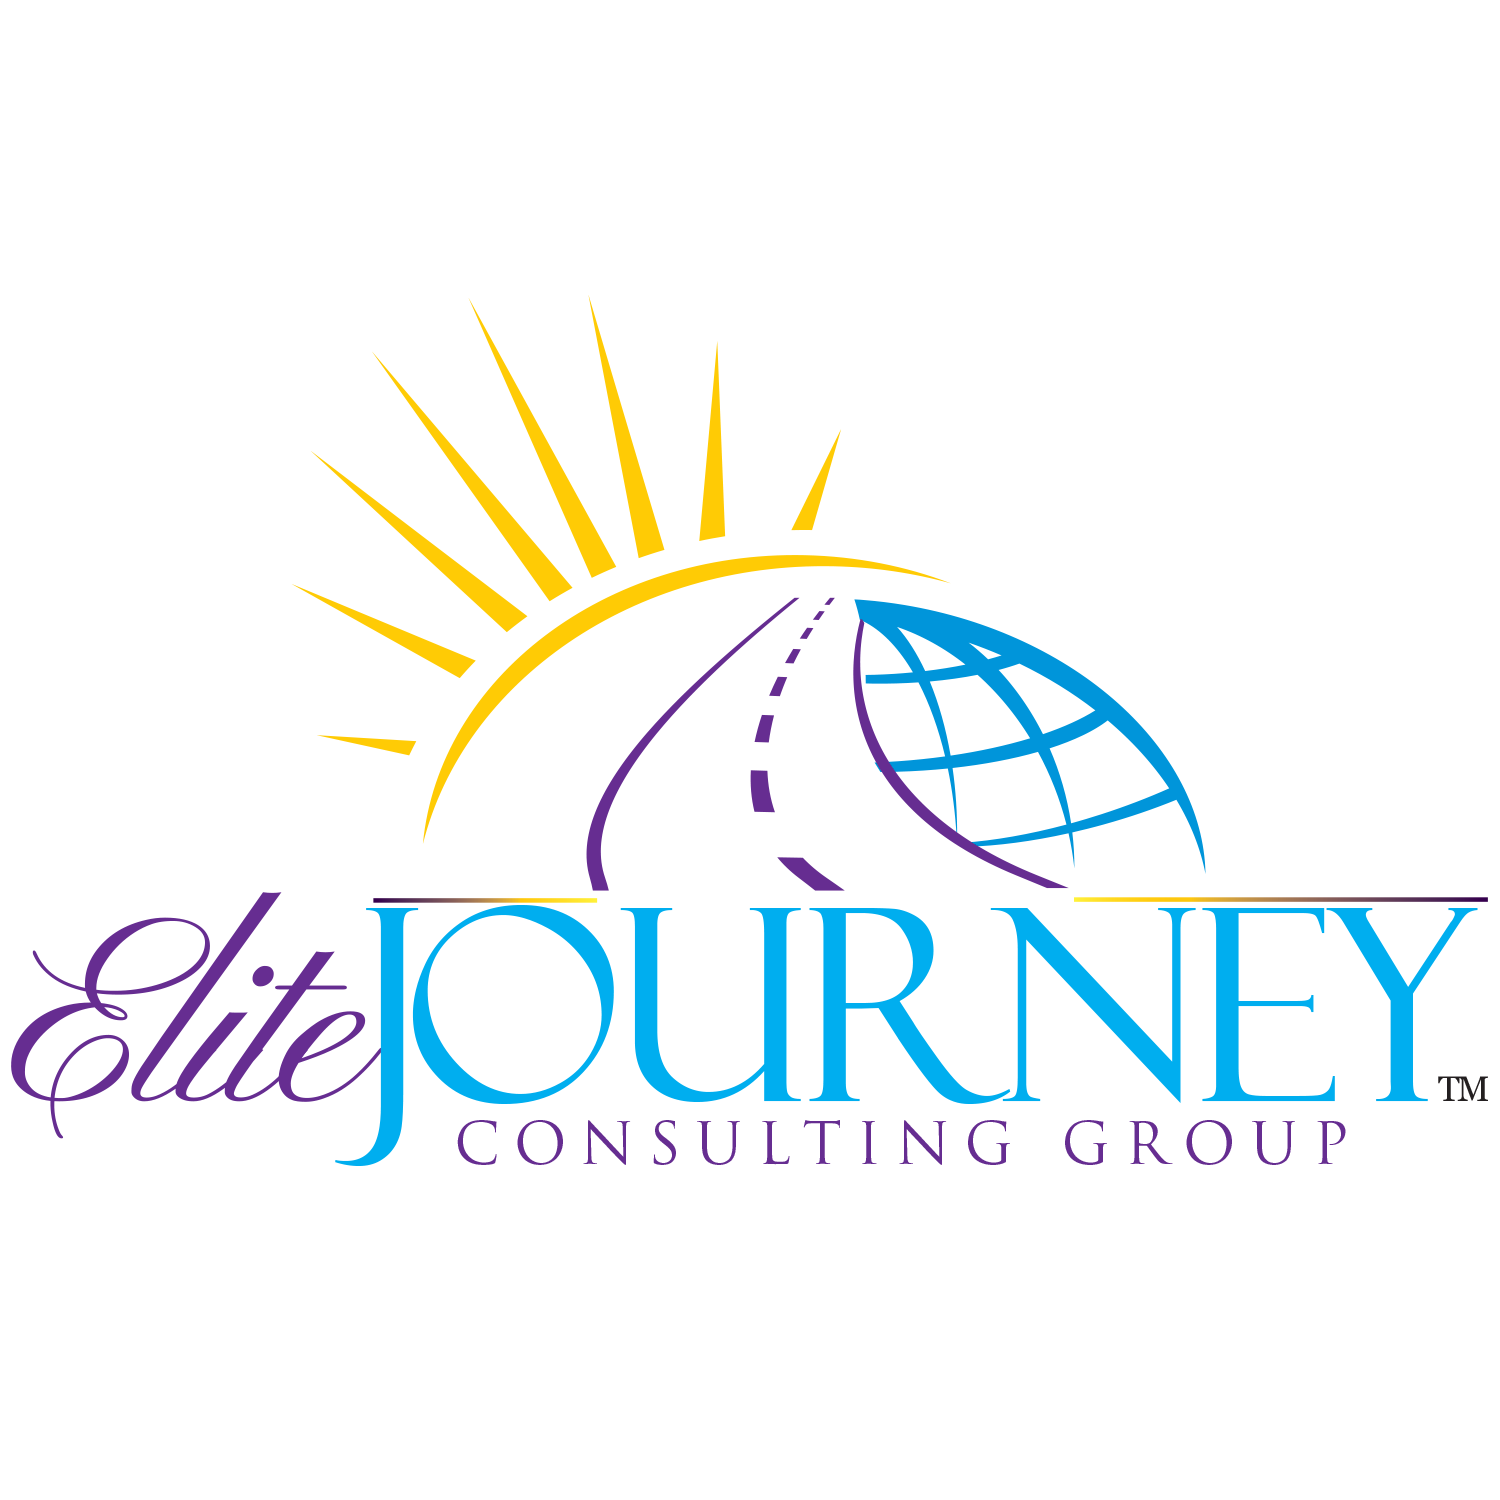 EliteJOURNEY Consulting Group